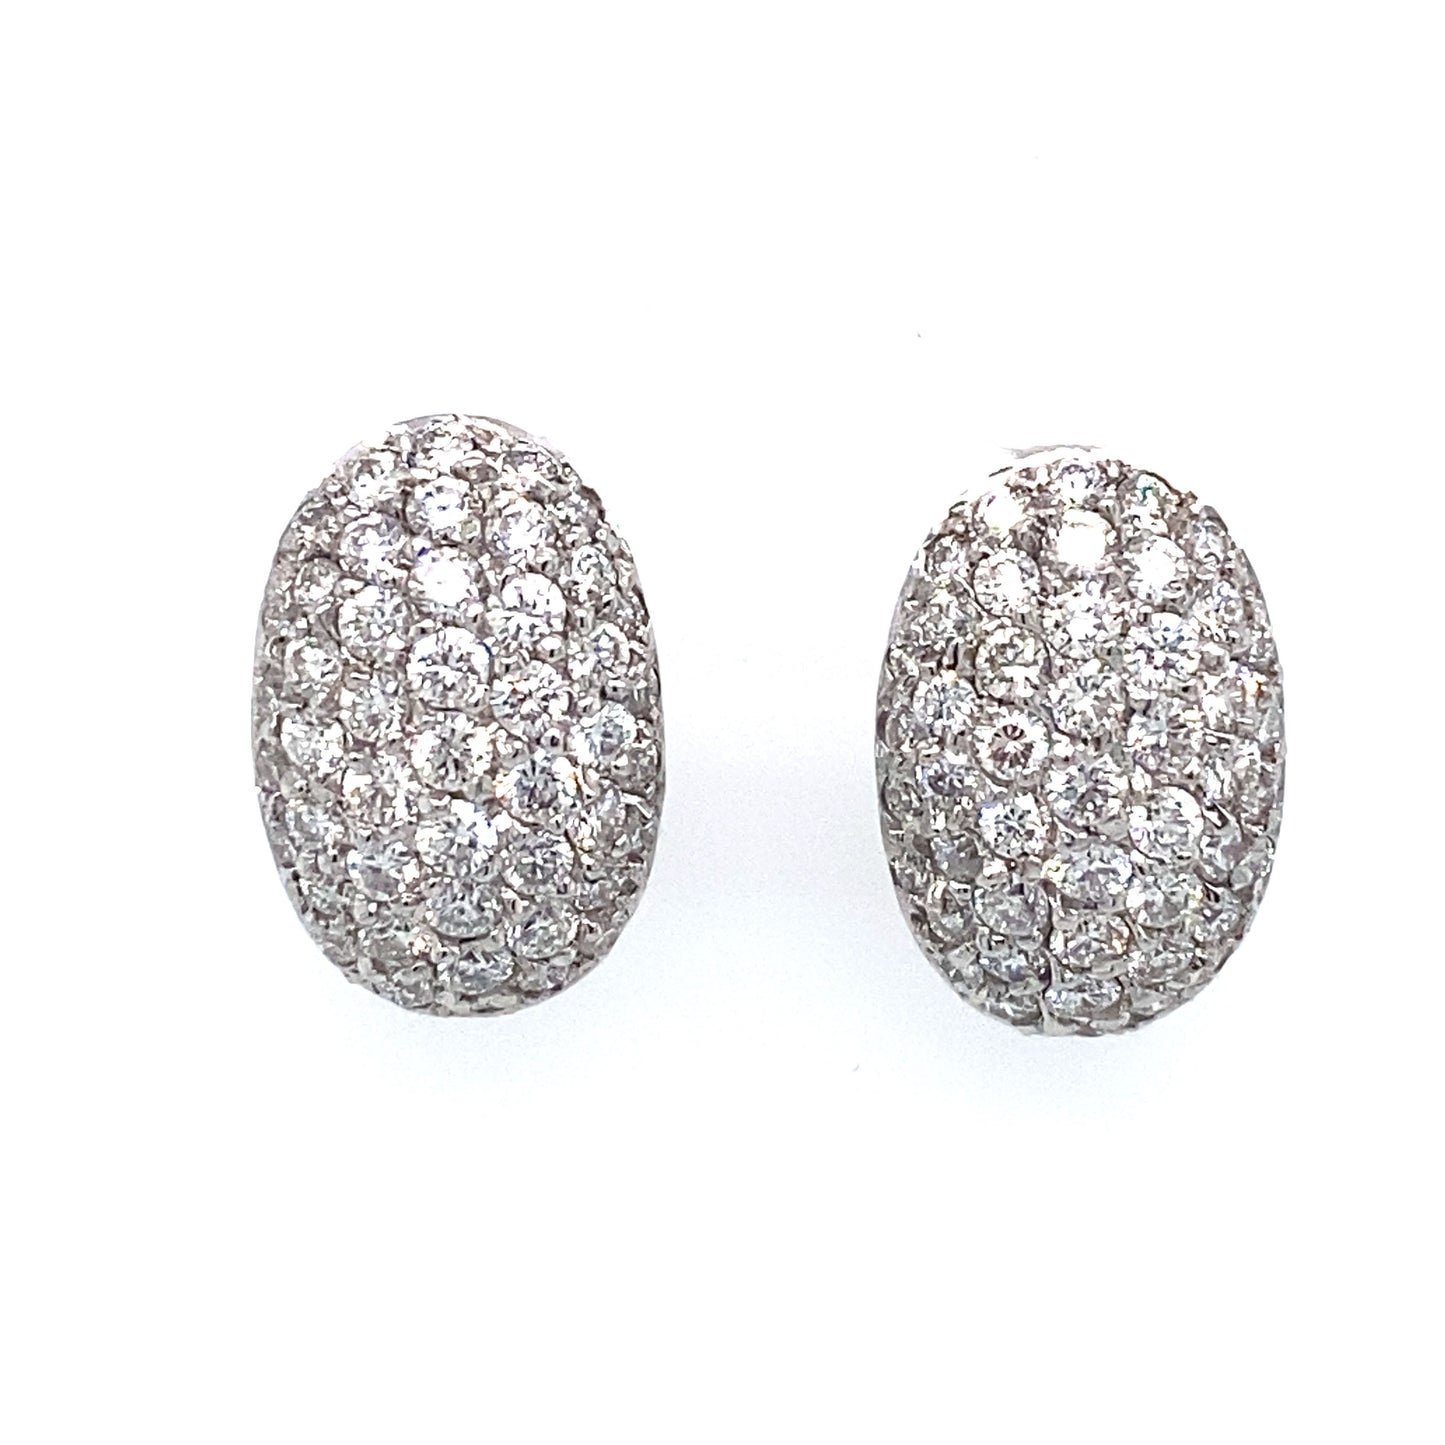 Circa 1950 Curved Oval French Clip Pave Diamond Earrings in 18K White Gold